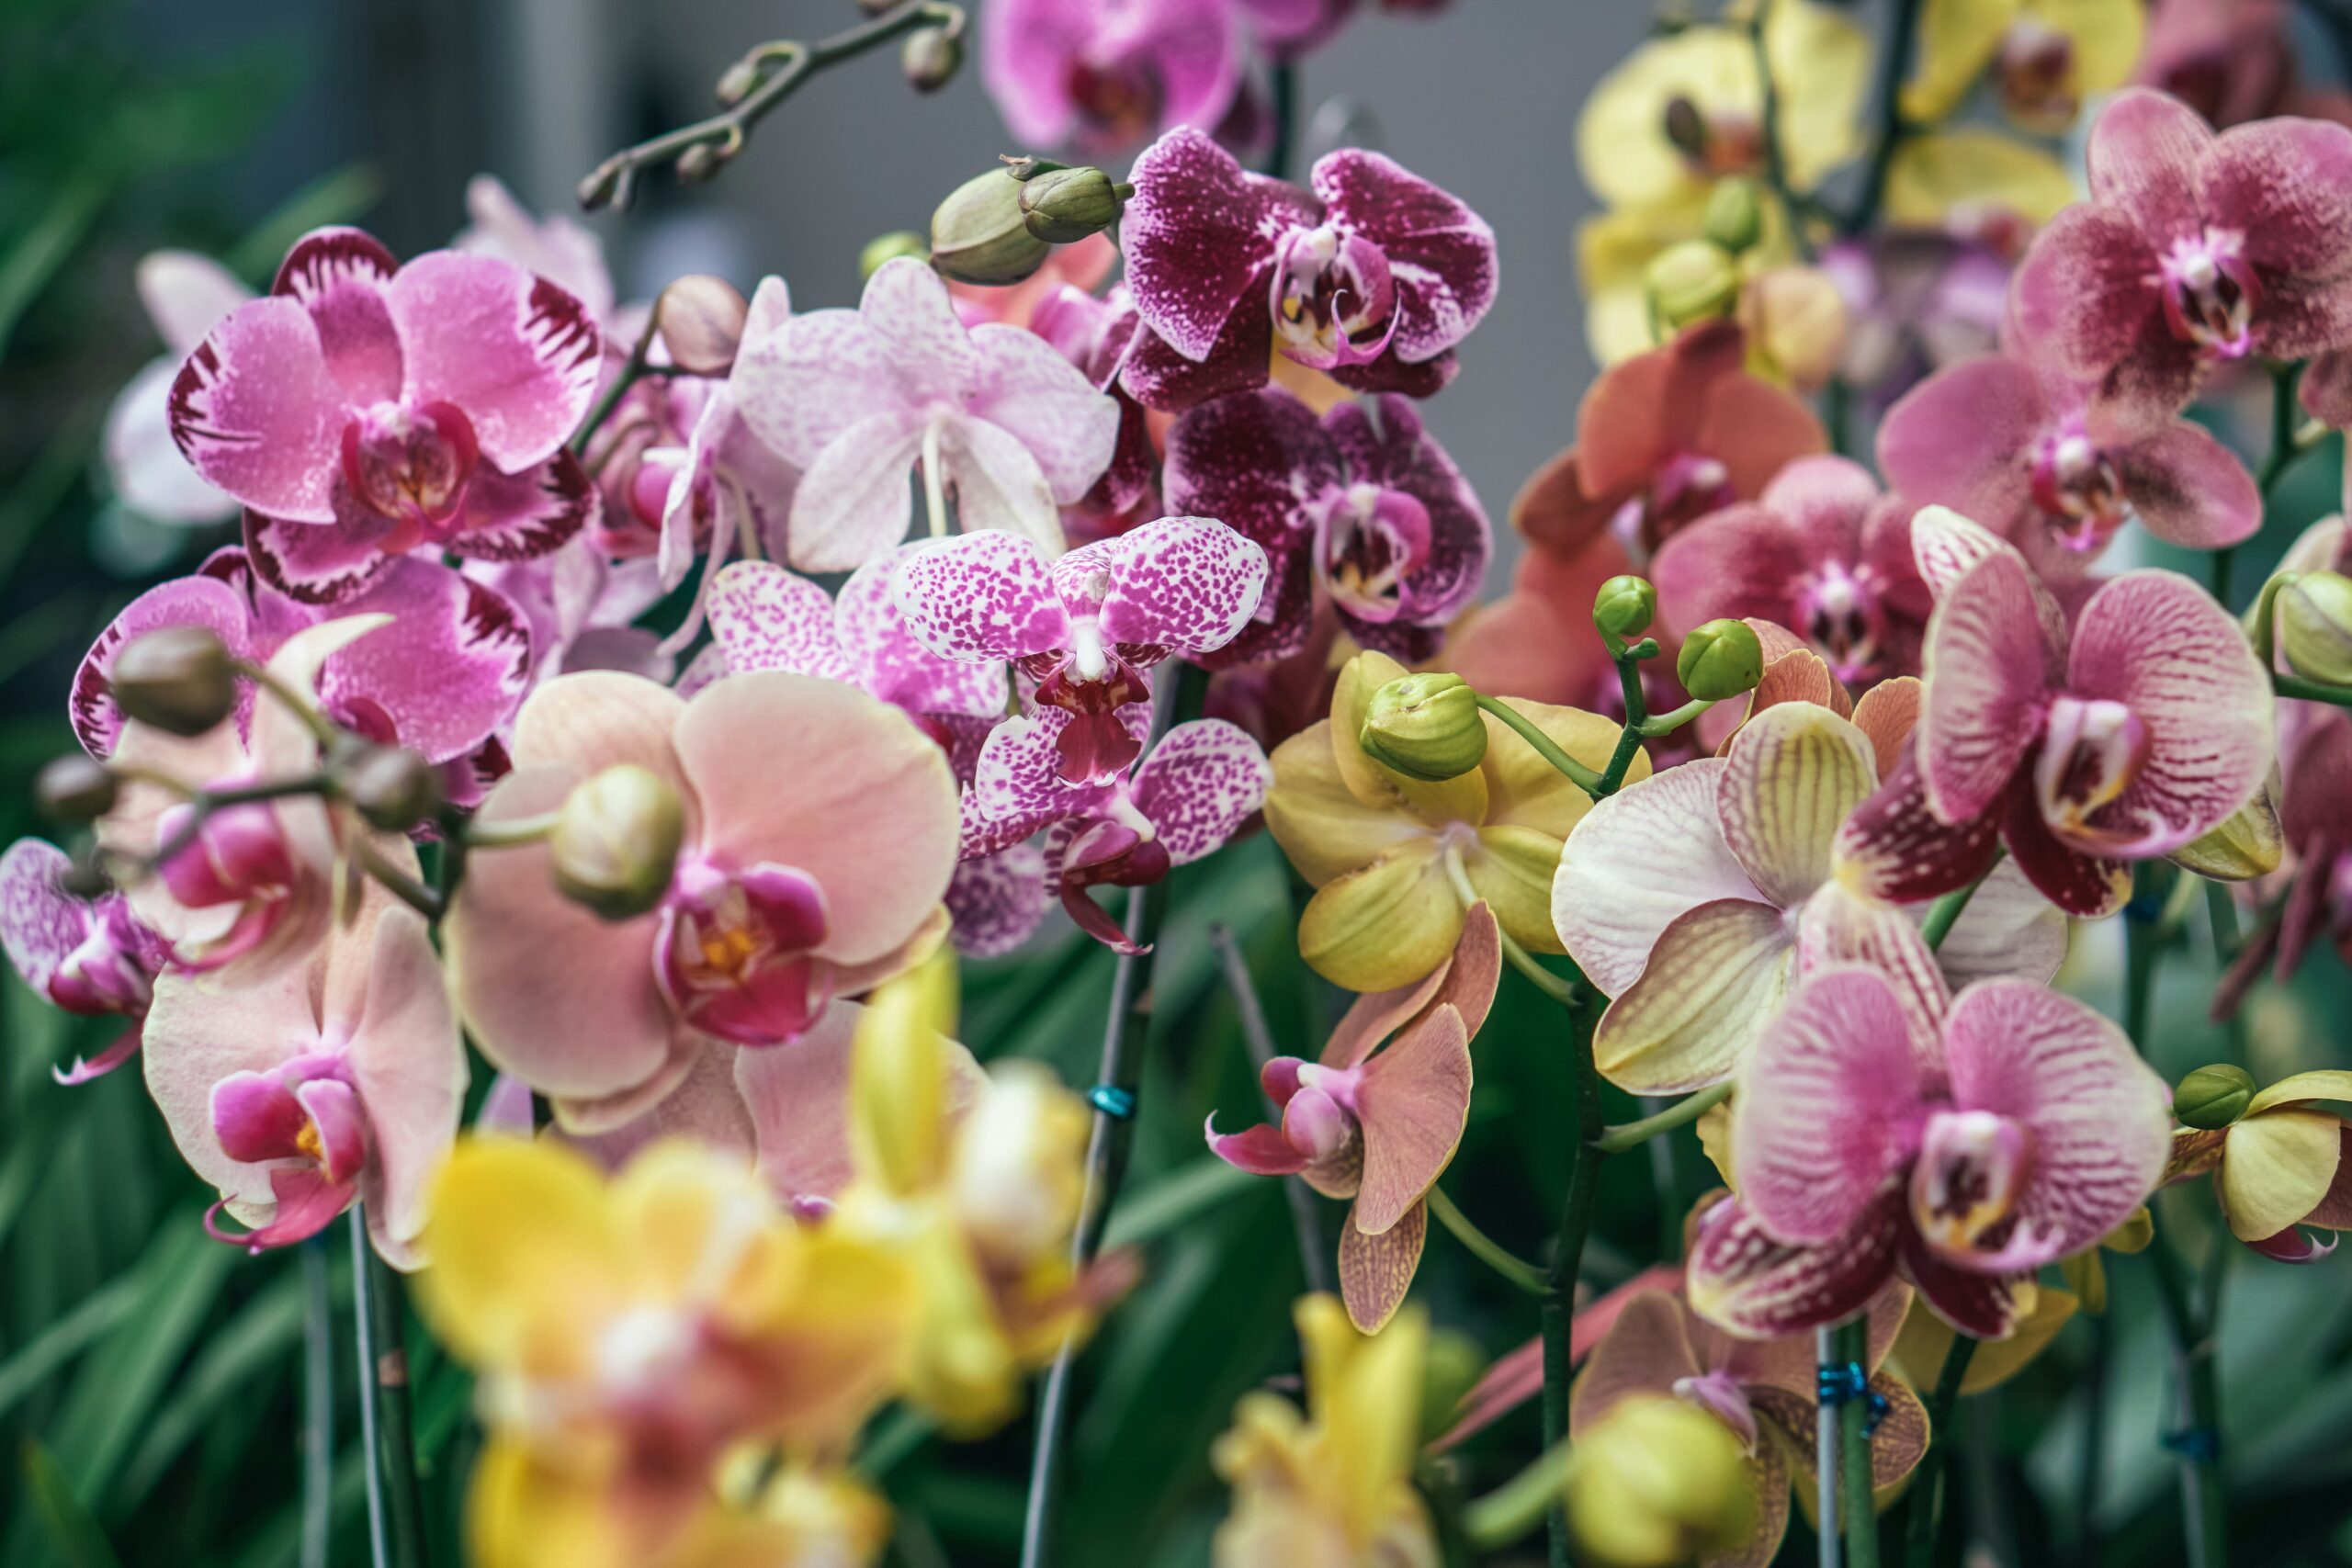 A diverse array of Orchids in full bloom, colors ranging from soft pink to deep maroon, epitomizing the essence of taking care of orchids.